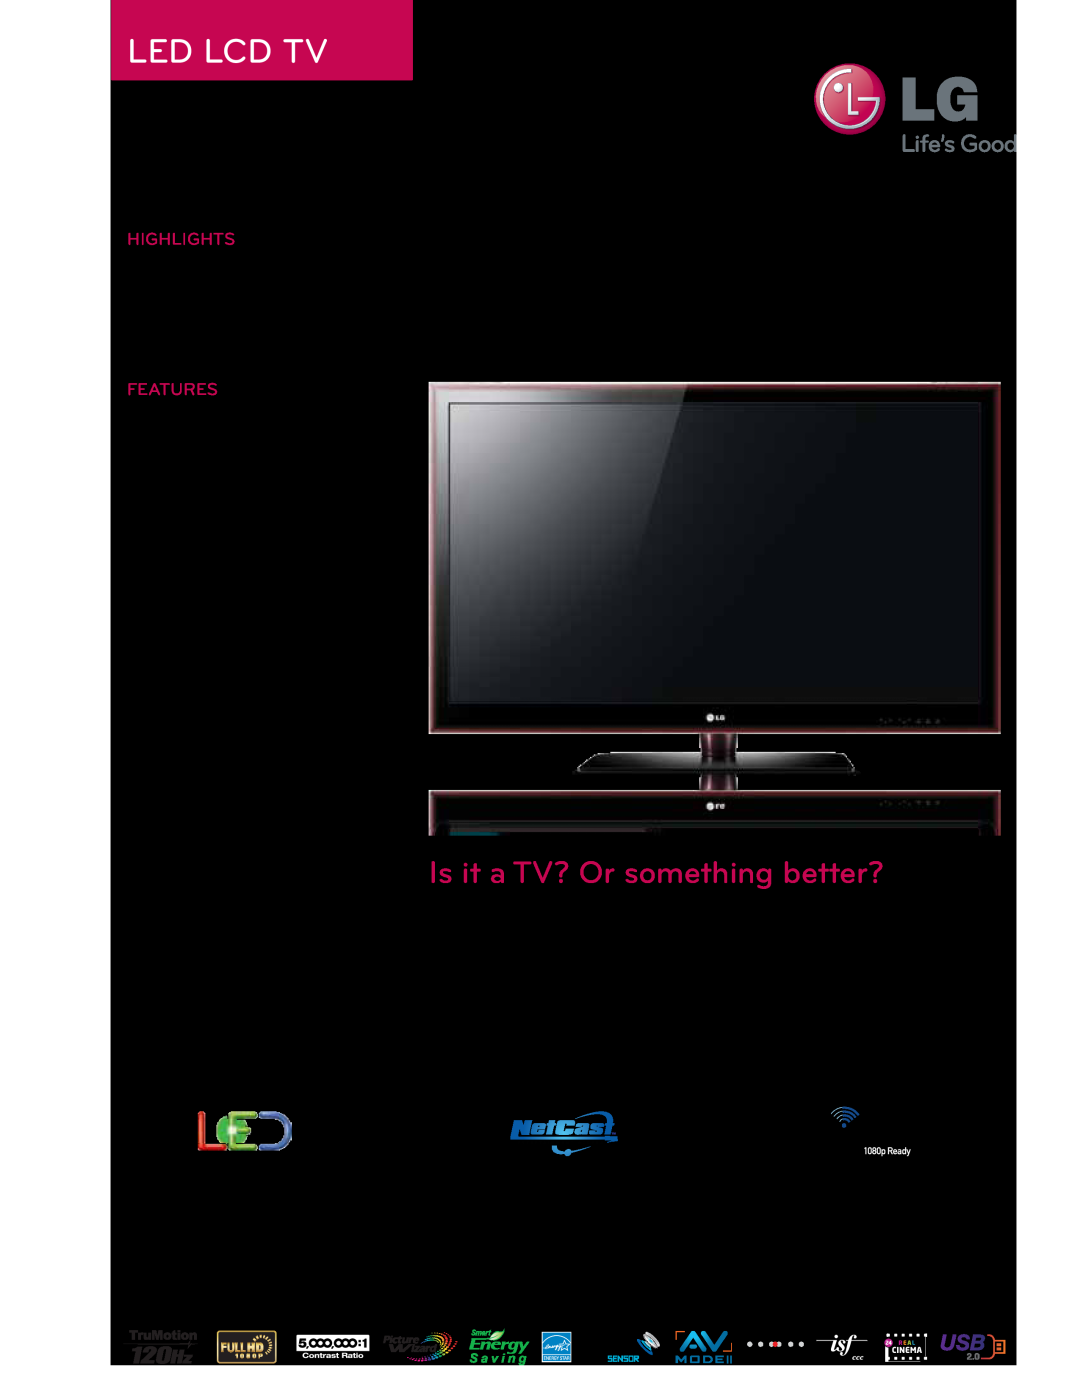 LG Electronics 55LE5500 manual Led Lcd Tv, Is it a TV? Or something better?, 55” Class, 54.6” diagonal, Highlights 